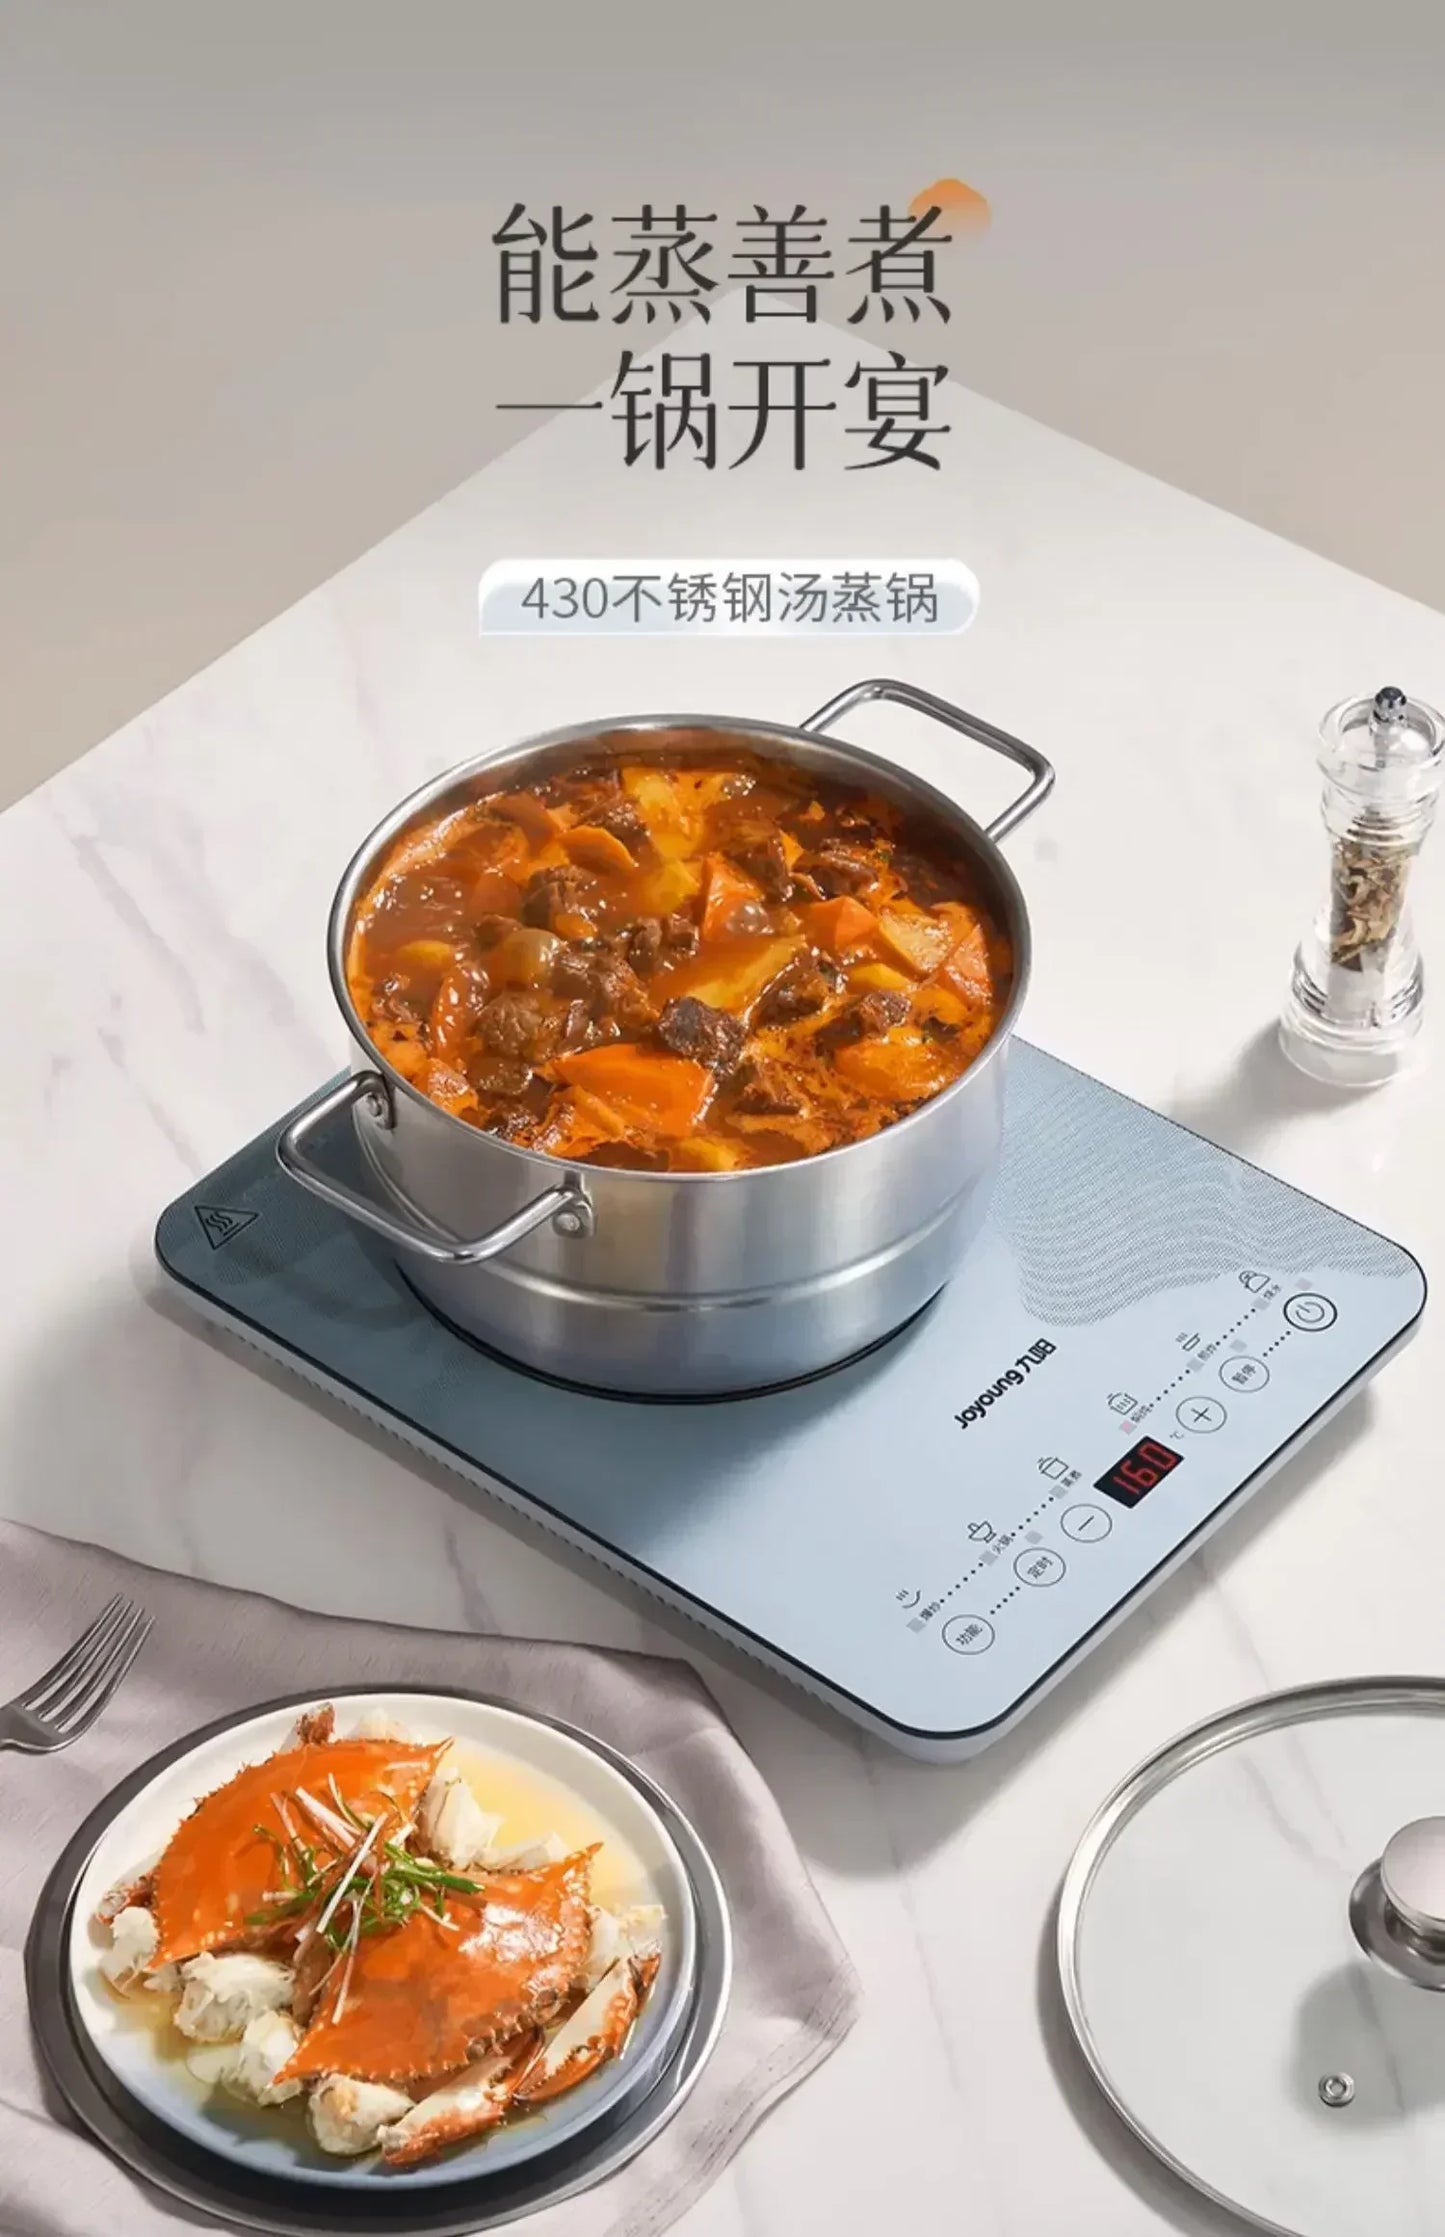 Jiuyang Induction Cooker Household Wok Integrated Pot
Energy-Saving Electromagnetic Stove Ultra-Thin Small